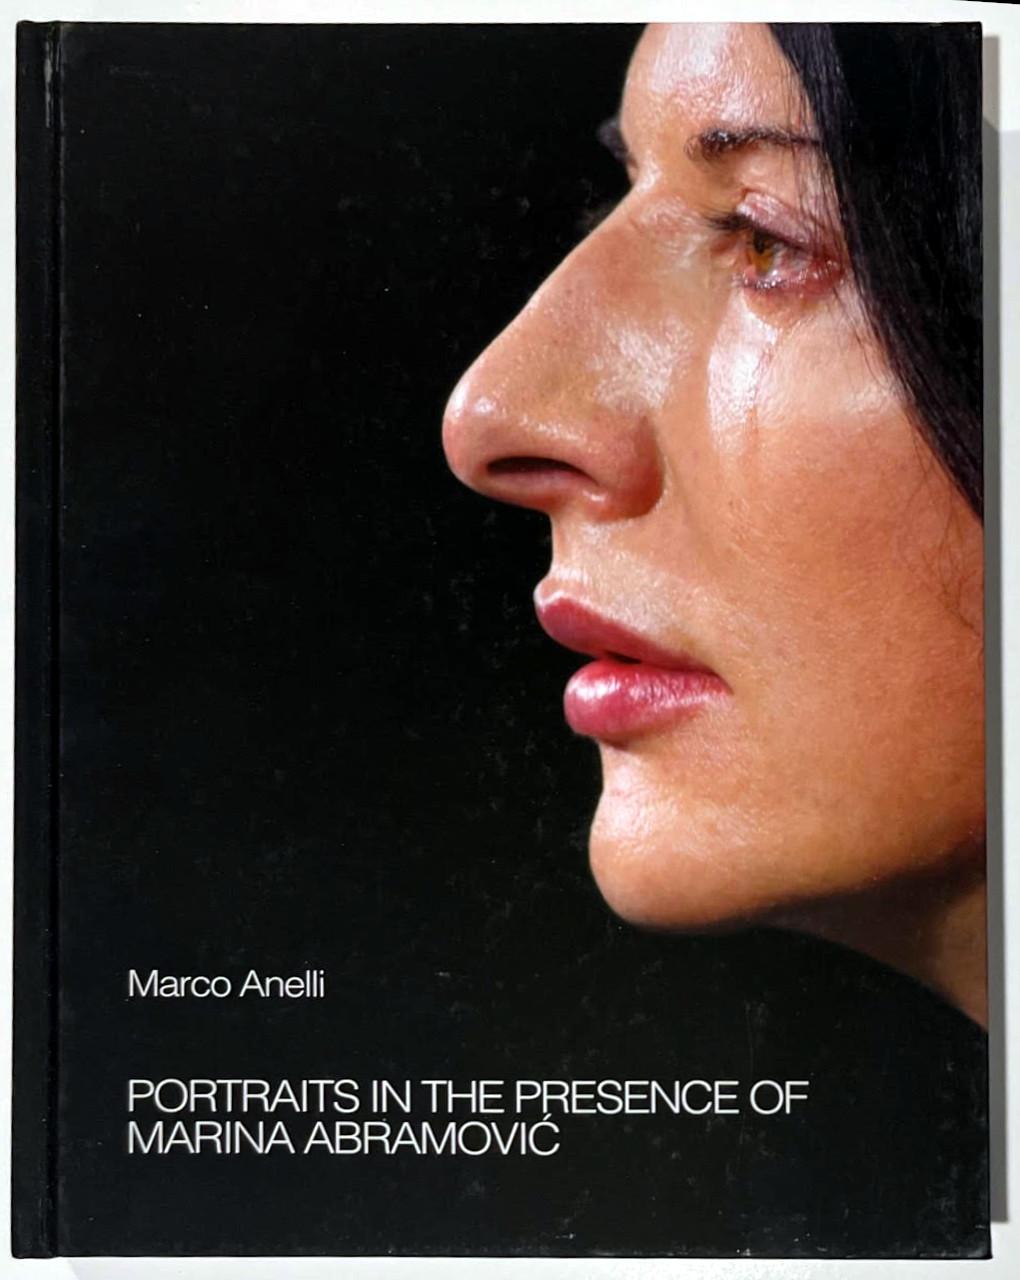 Marina Abramović
Portraits in the Presence of Marina Abramovic (Hand signed by BOTH Marina Abramovic and photographer Marco Anelli), 2021
Hardback monograph with no dust jacket as issued (Hand signed by BOTH Marina Abramovic and photographer Marco